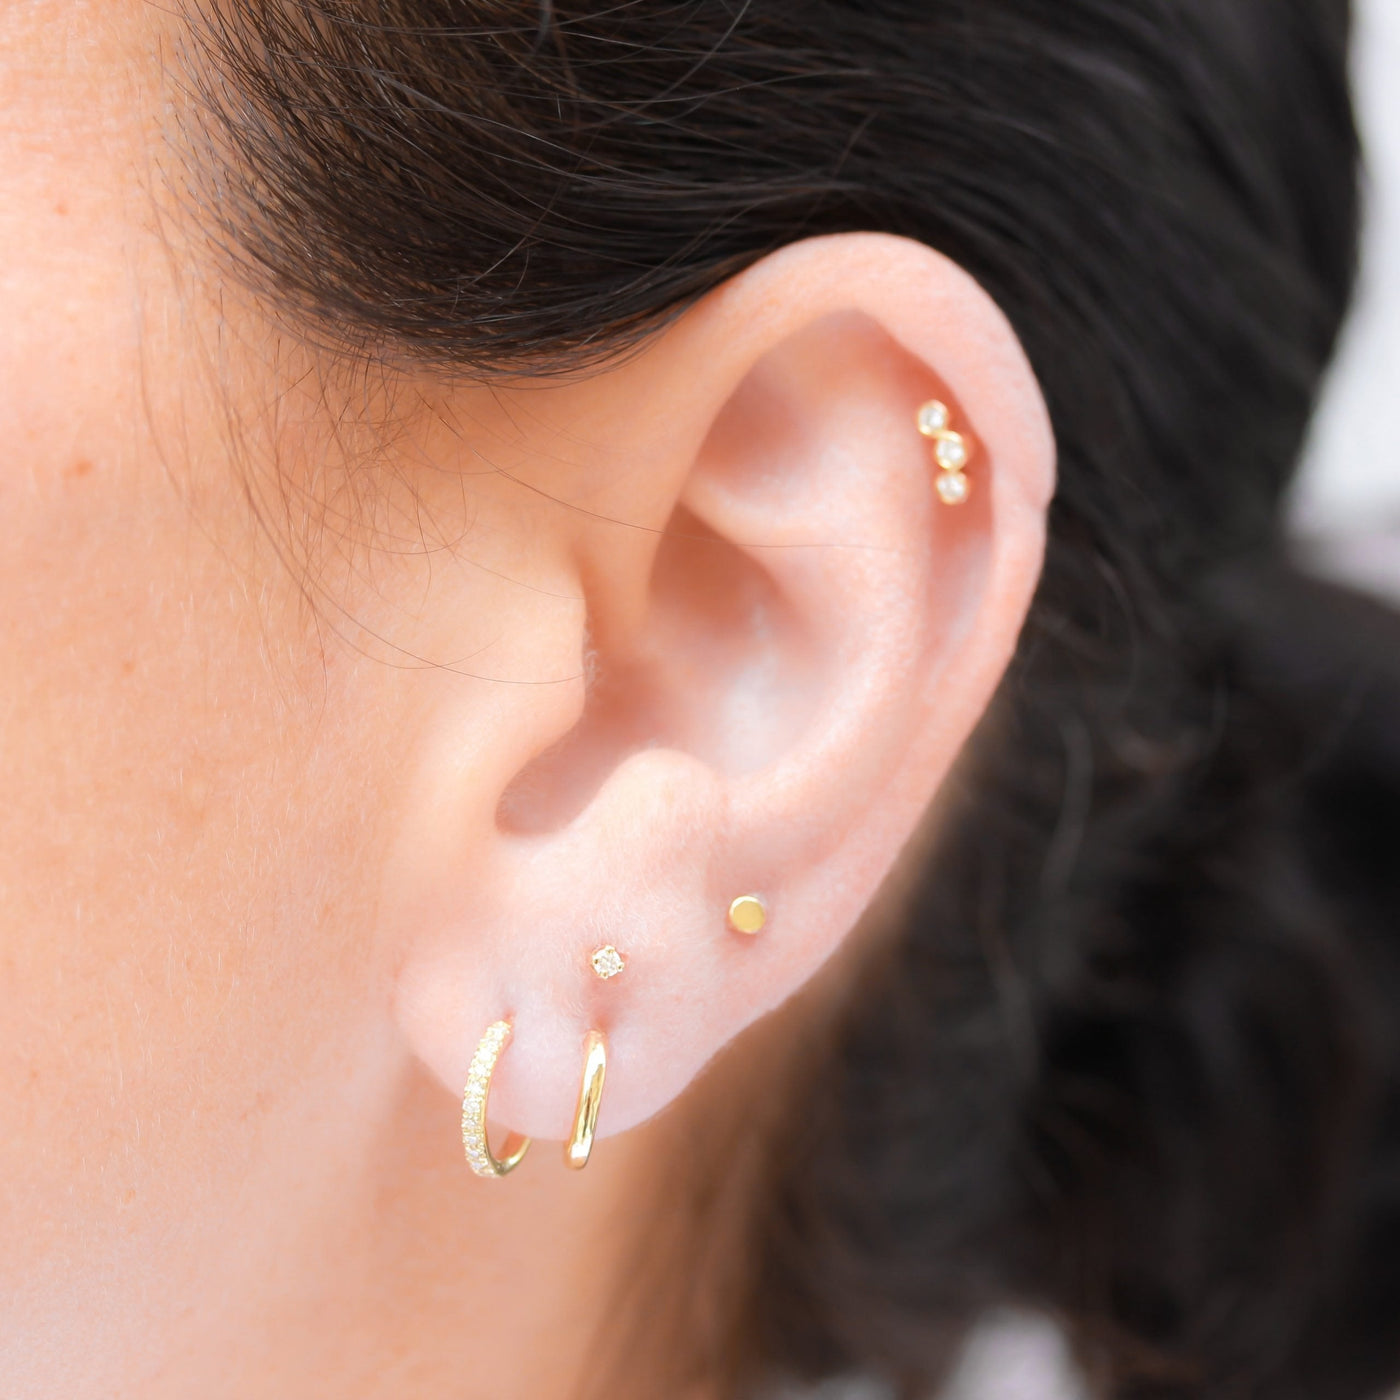 Ear Piercing Guide for Cartilage and Stacking | By Charlotte